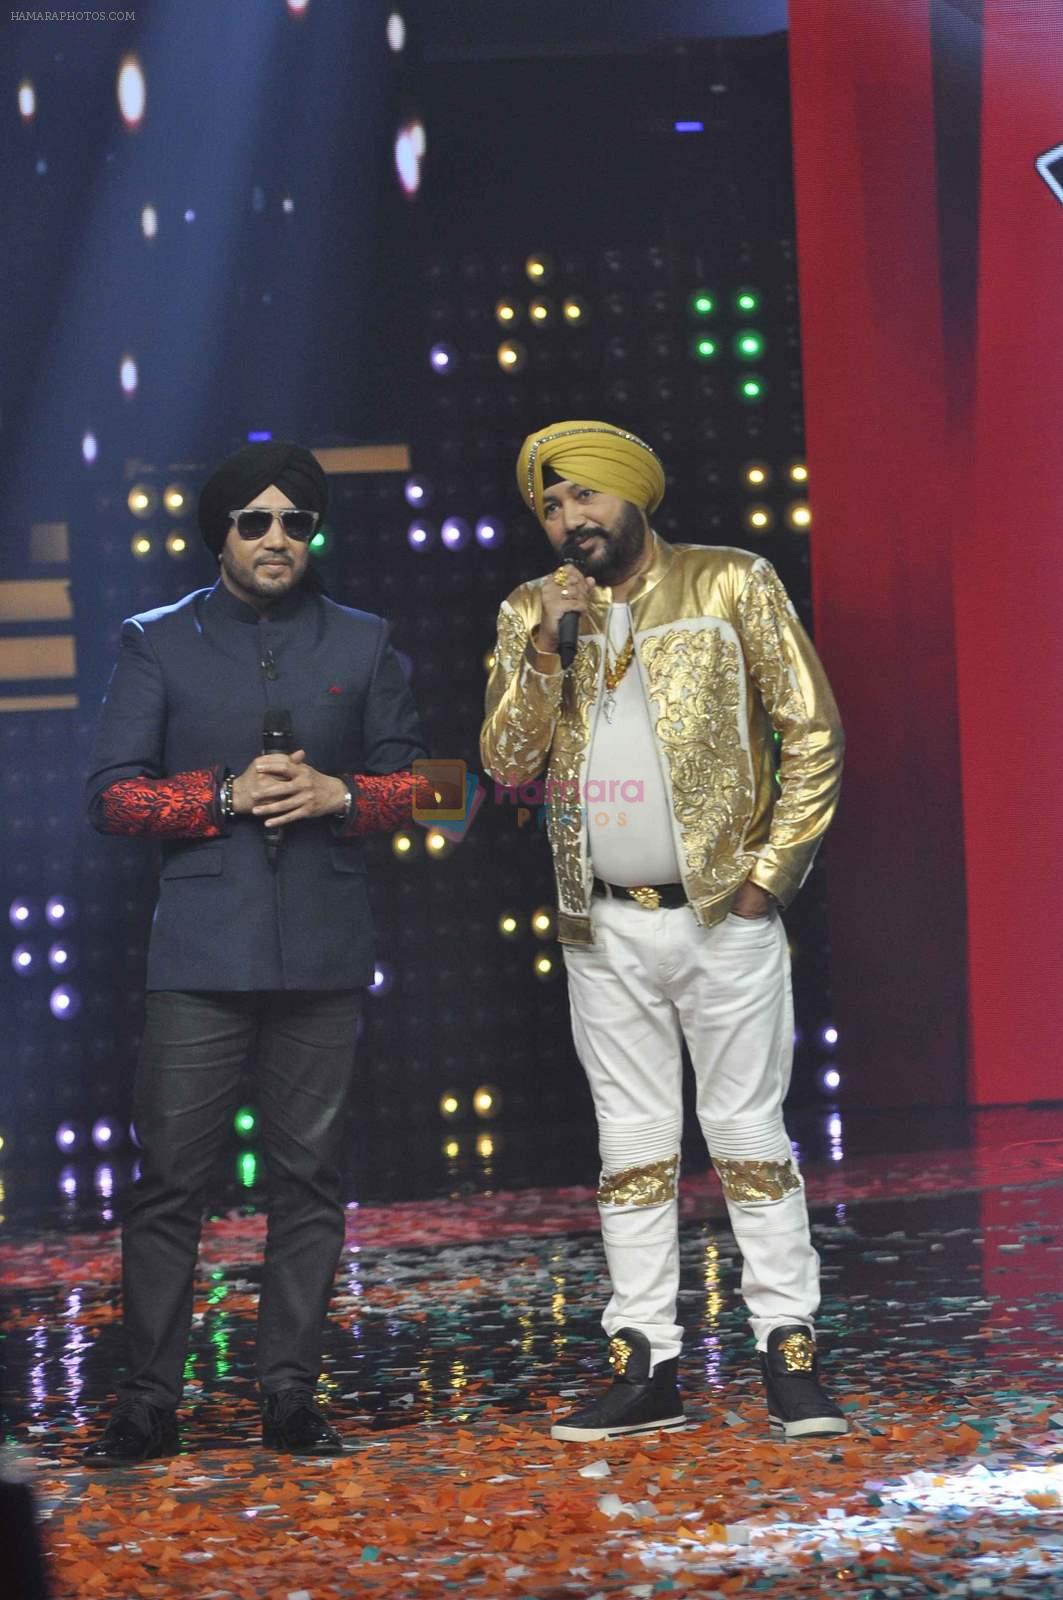 Daler mehndi, Mika Singh at Voice of India - Independence day special shoot in R K Studios on 10th Aug 2015